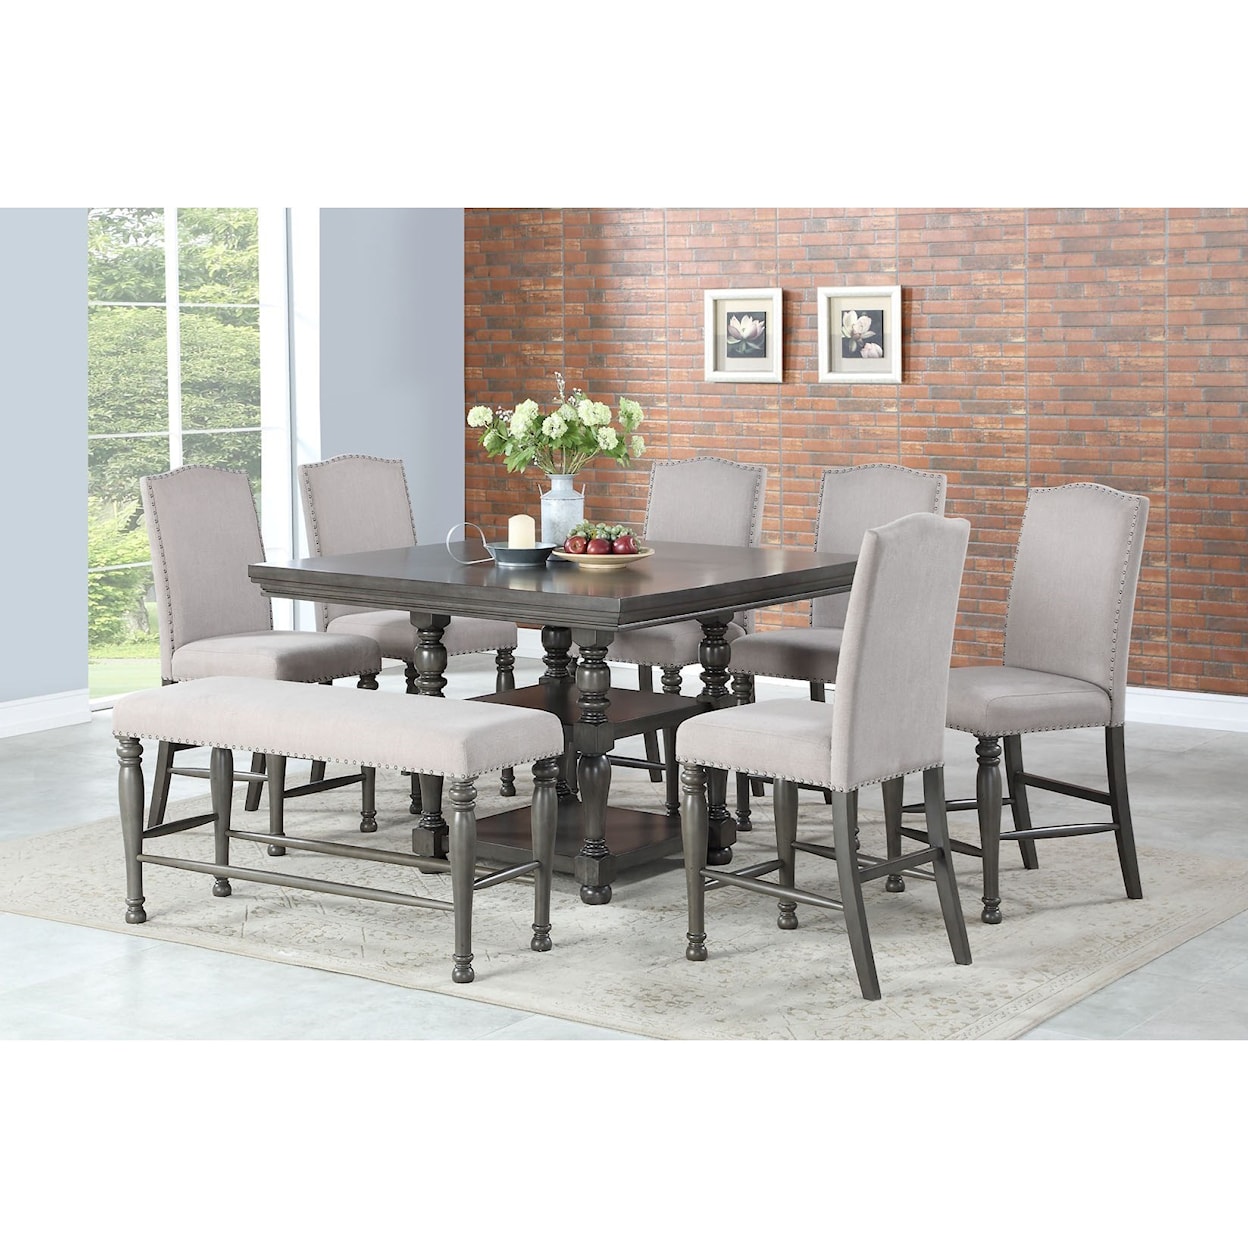 Steve Silver Caswell 8 Pc Counter Dining Set w/ Bench